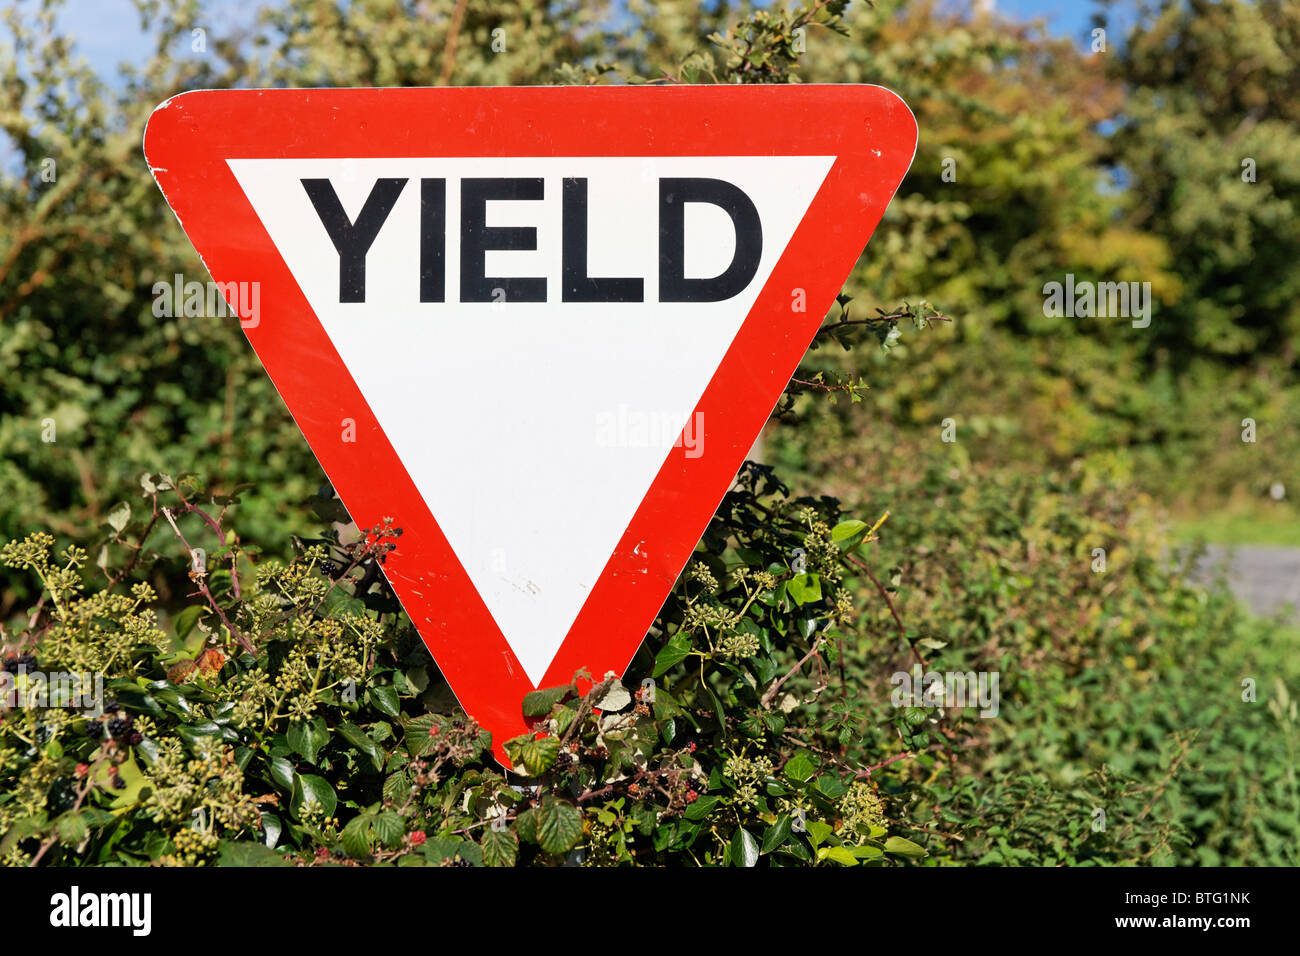 Yield road sign in Ireland. Stock Photo